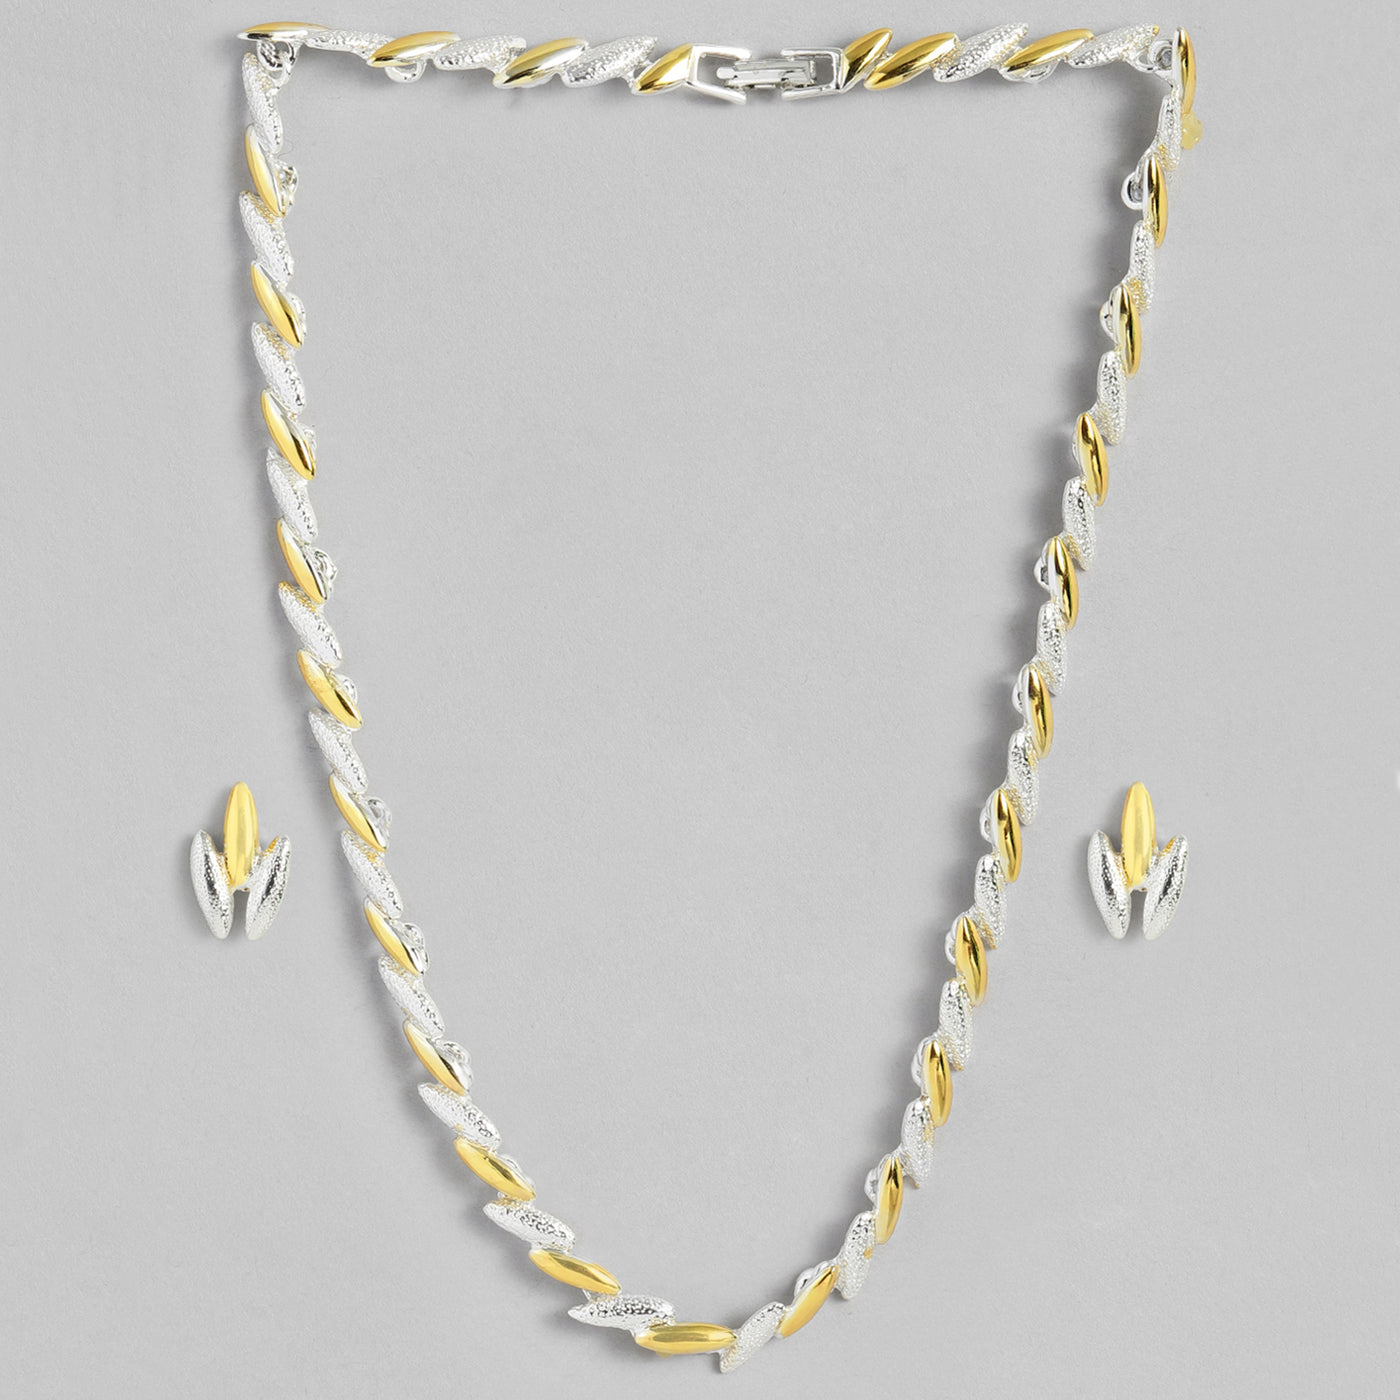 Estele 24 Kt Gold and Silver Plated Chain Necklace Set for women